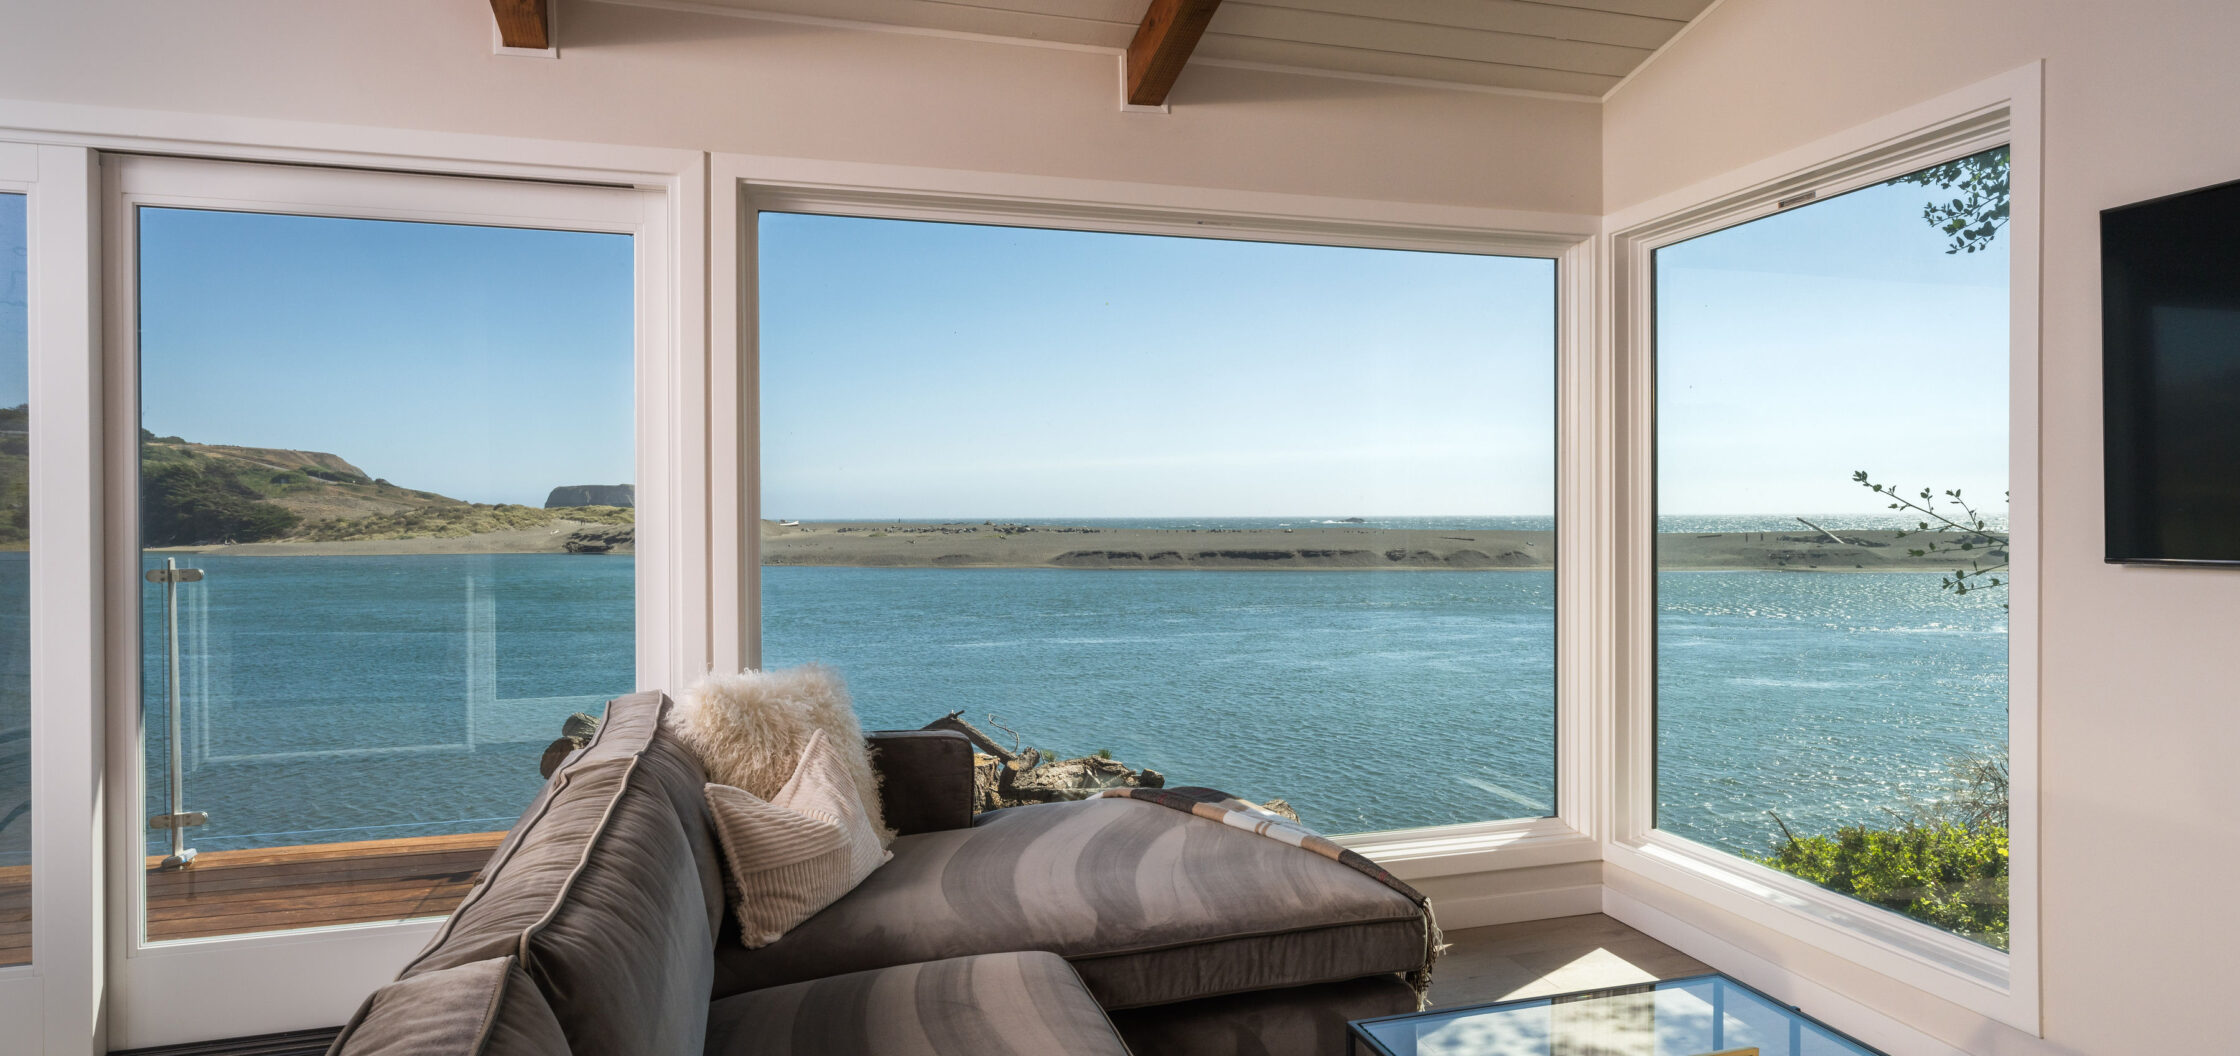 Headlands house sunset view - Northern California vacation rental